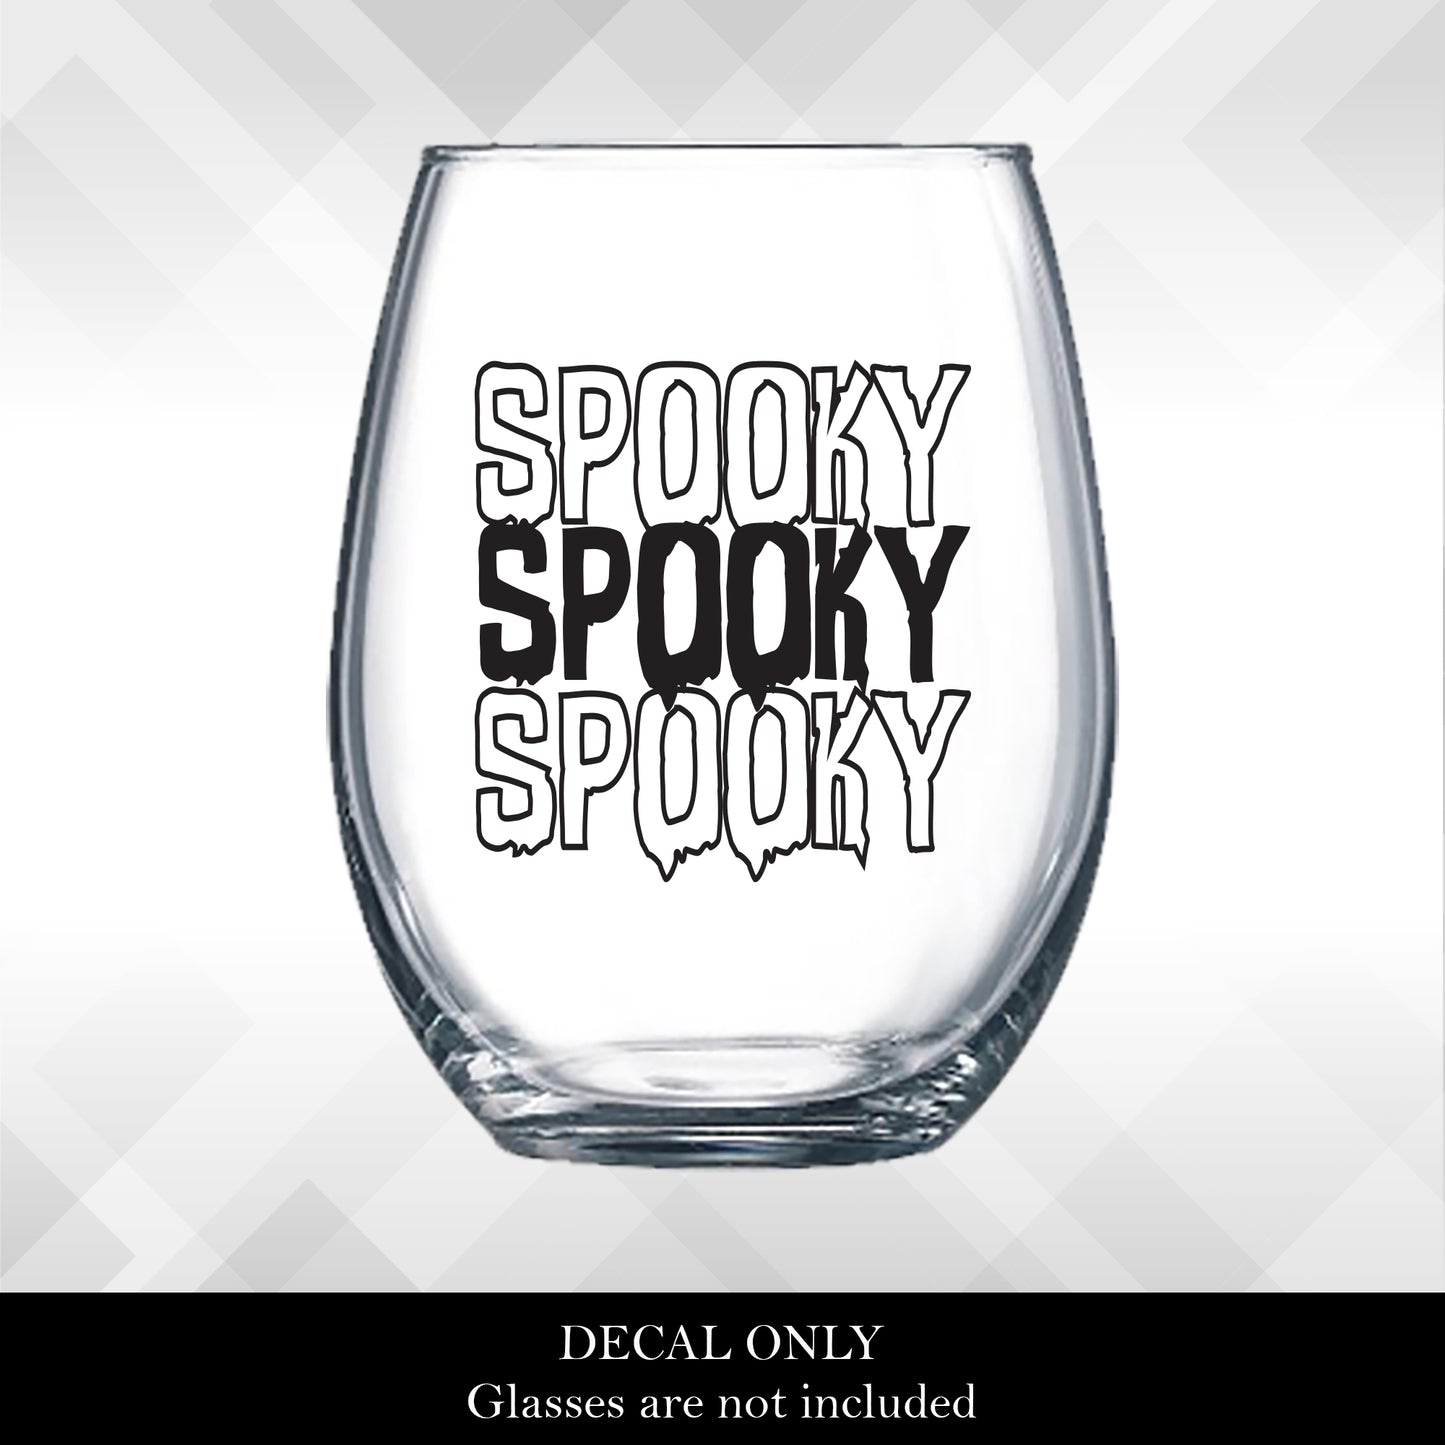 Decal Spooky, Spooky, Spooky for Halloween Wine Glasses